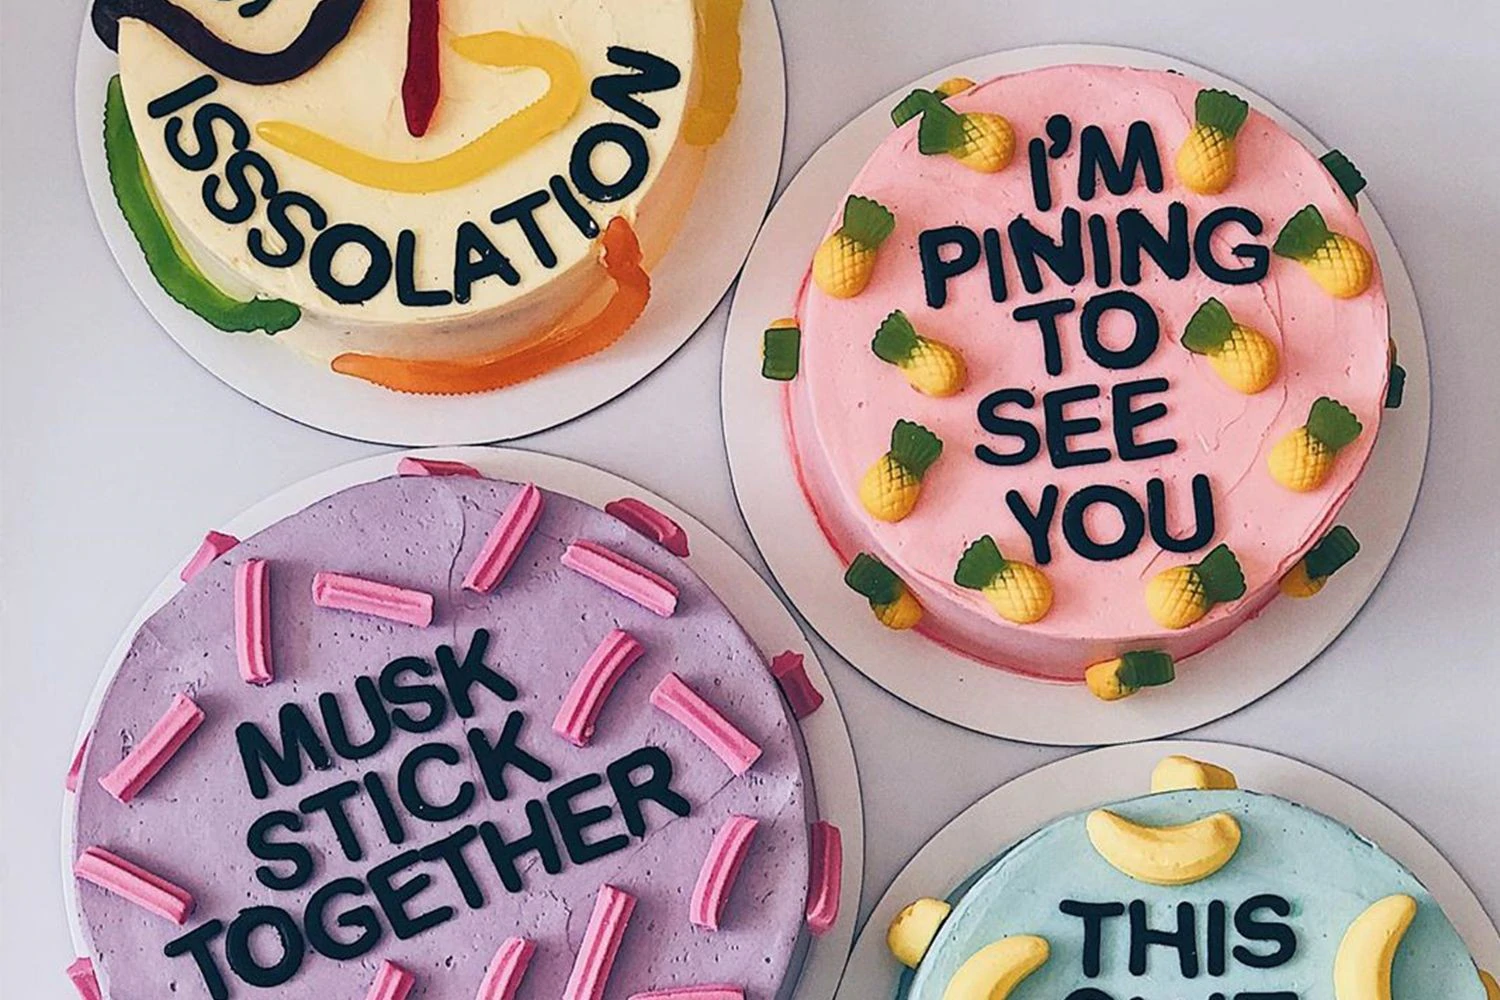 This Melbourne baker has created a range of cheery cakes to get you through iso